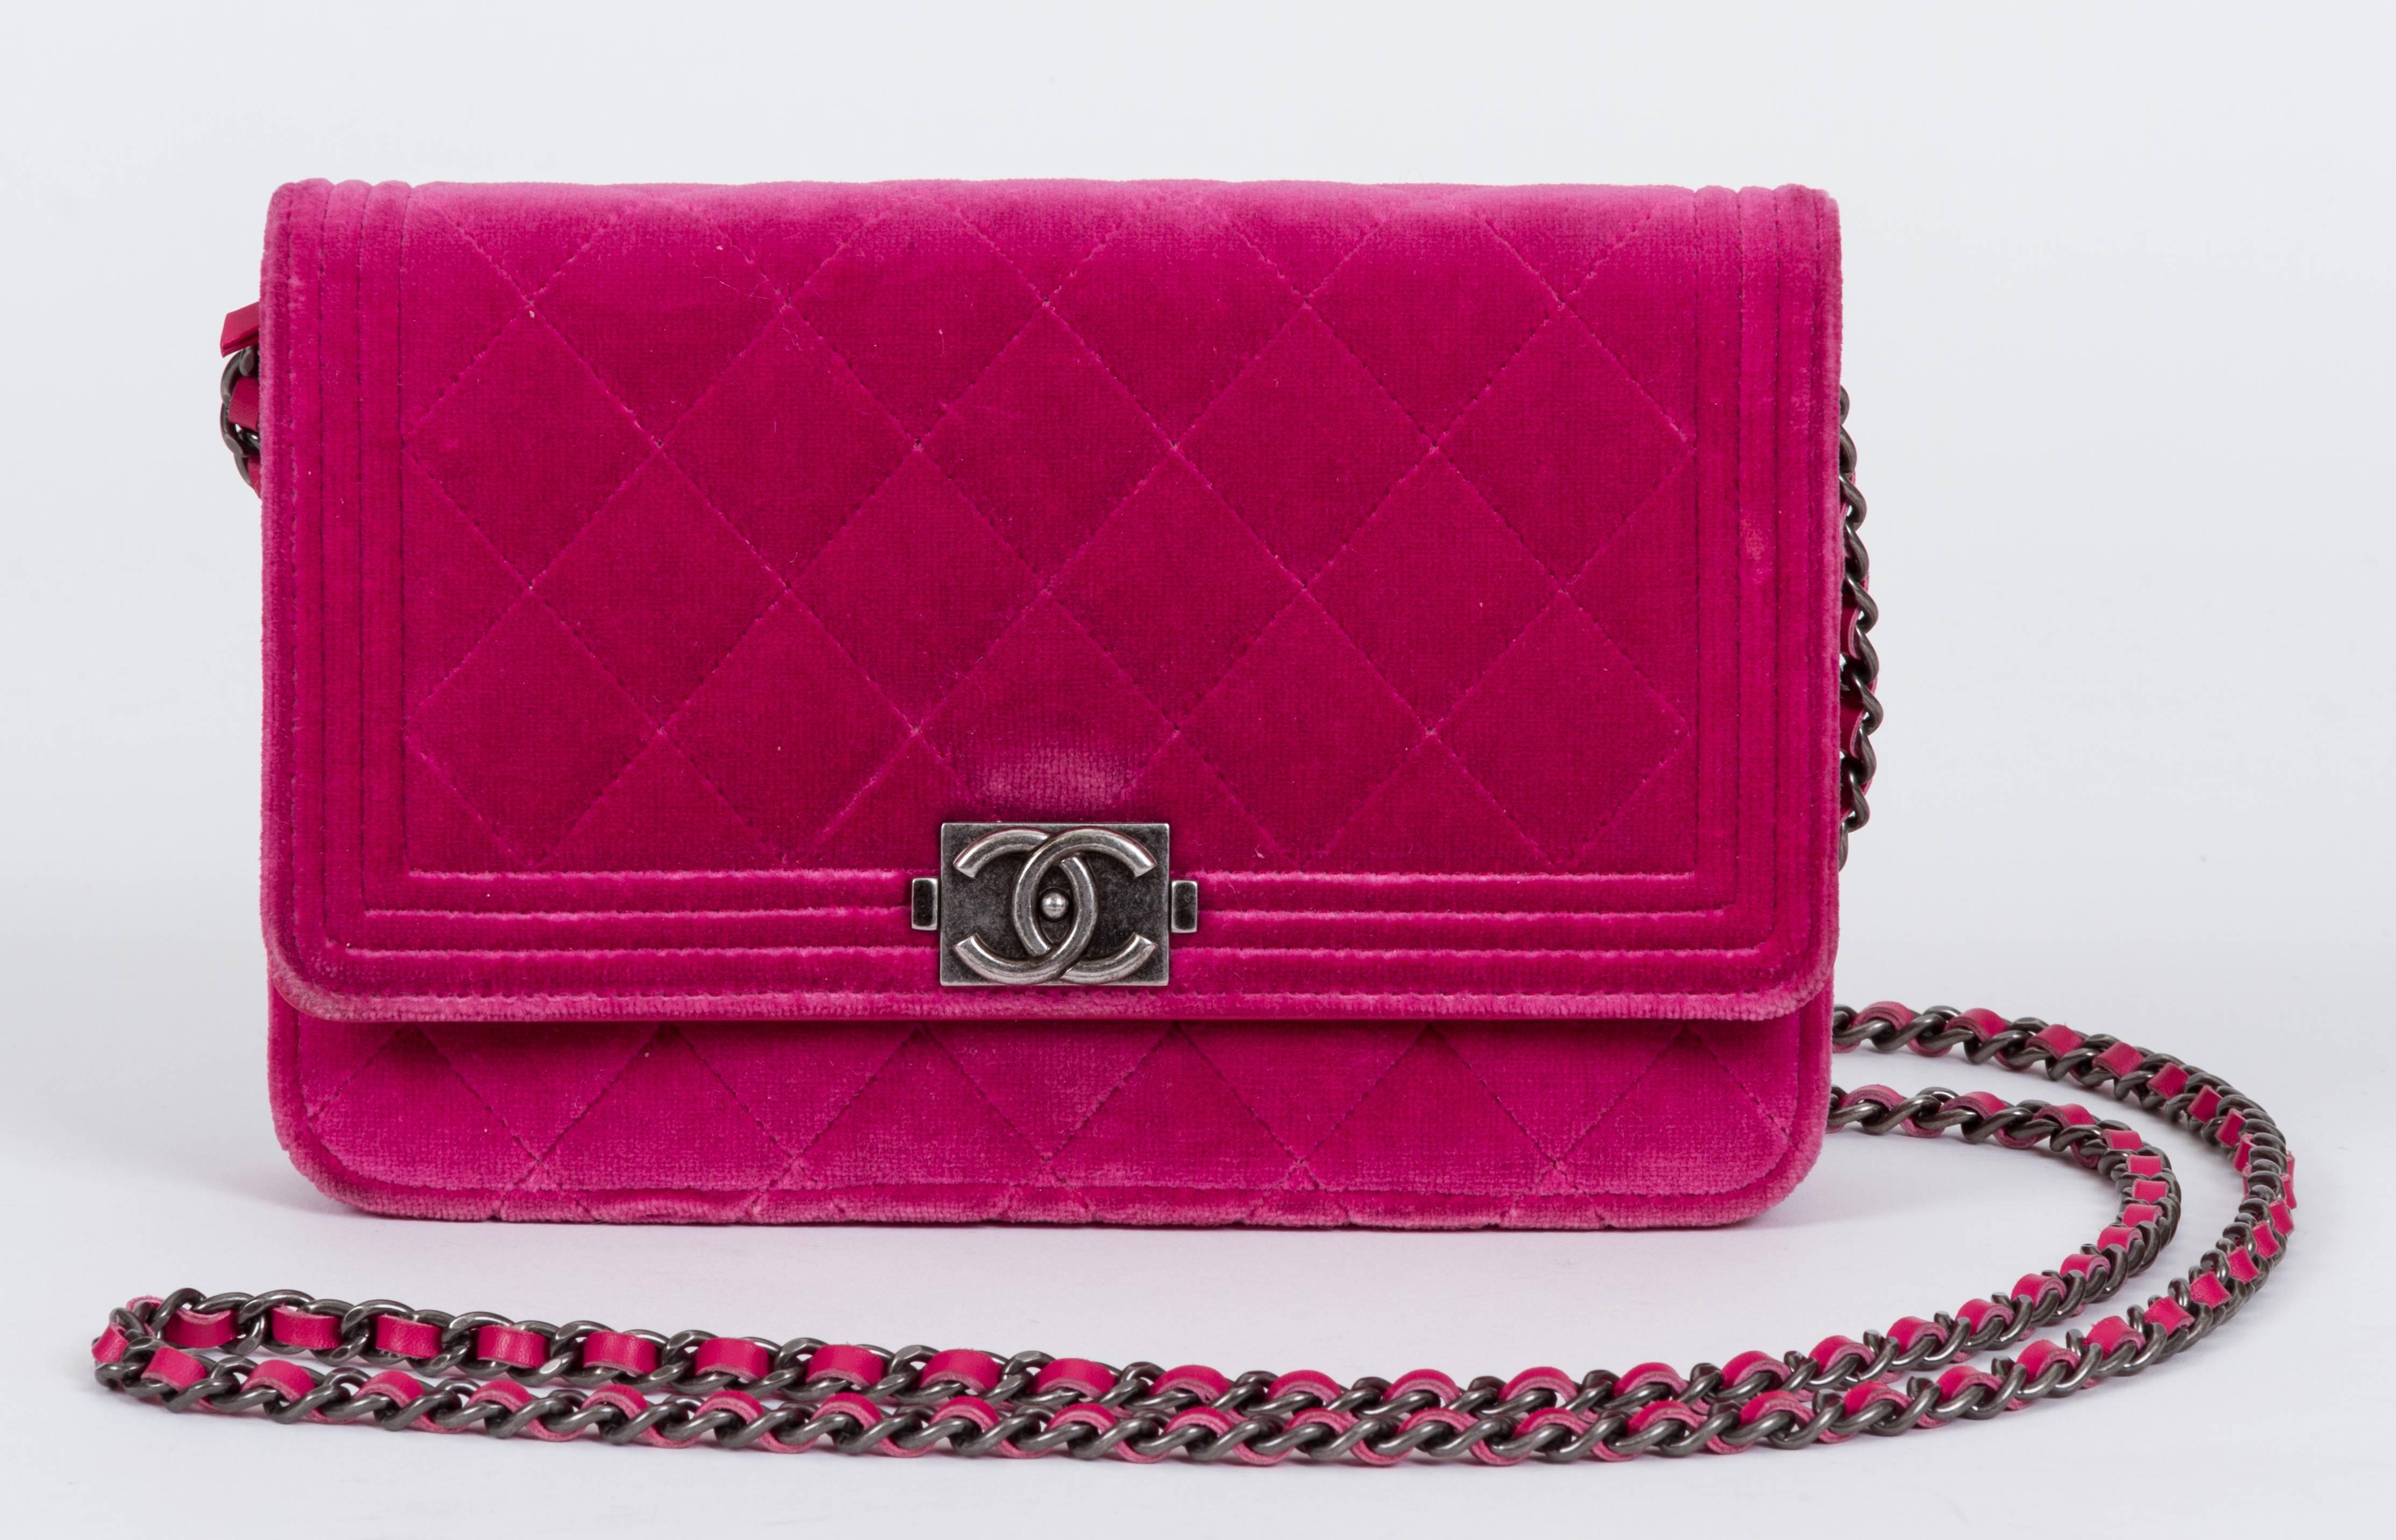 Chanel fuchsia velvet quilted boy wallet on a chain with gunmetal hardware, fuchsia leather lining. Can be worn as a clutch or as a cross body. Minor wear on corners. Measurements 7.5